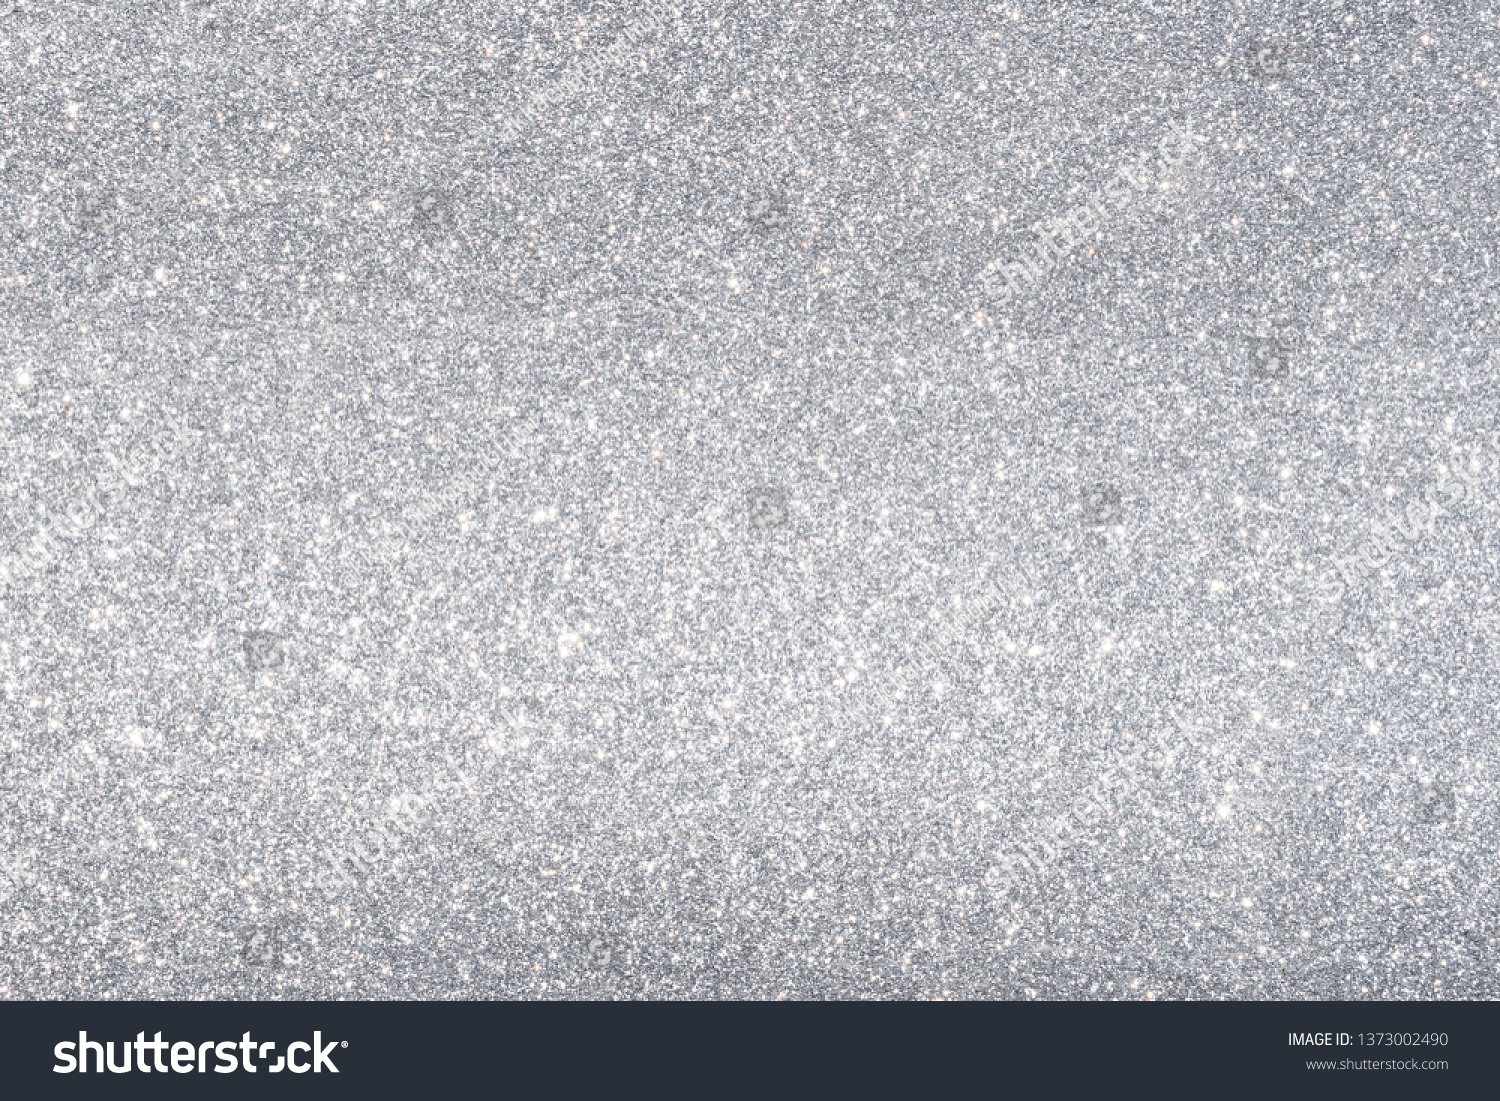 sparkles of silver glitter abstract background #1373002490